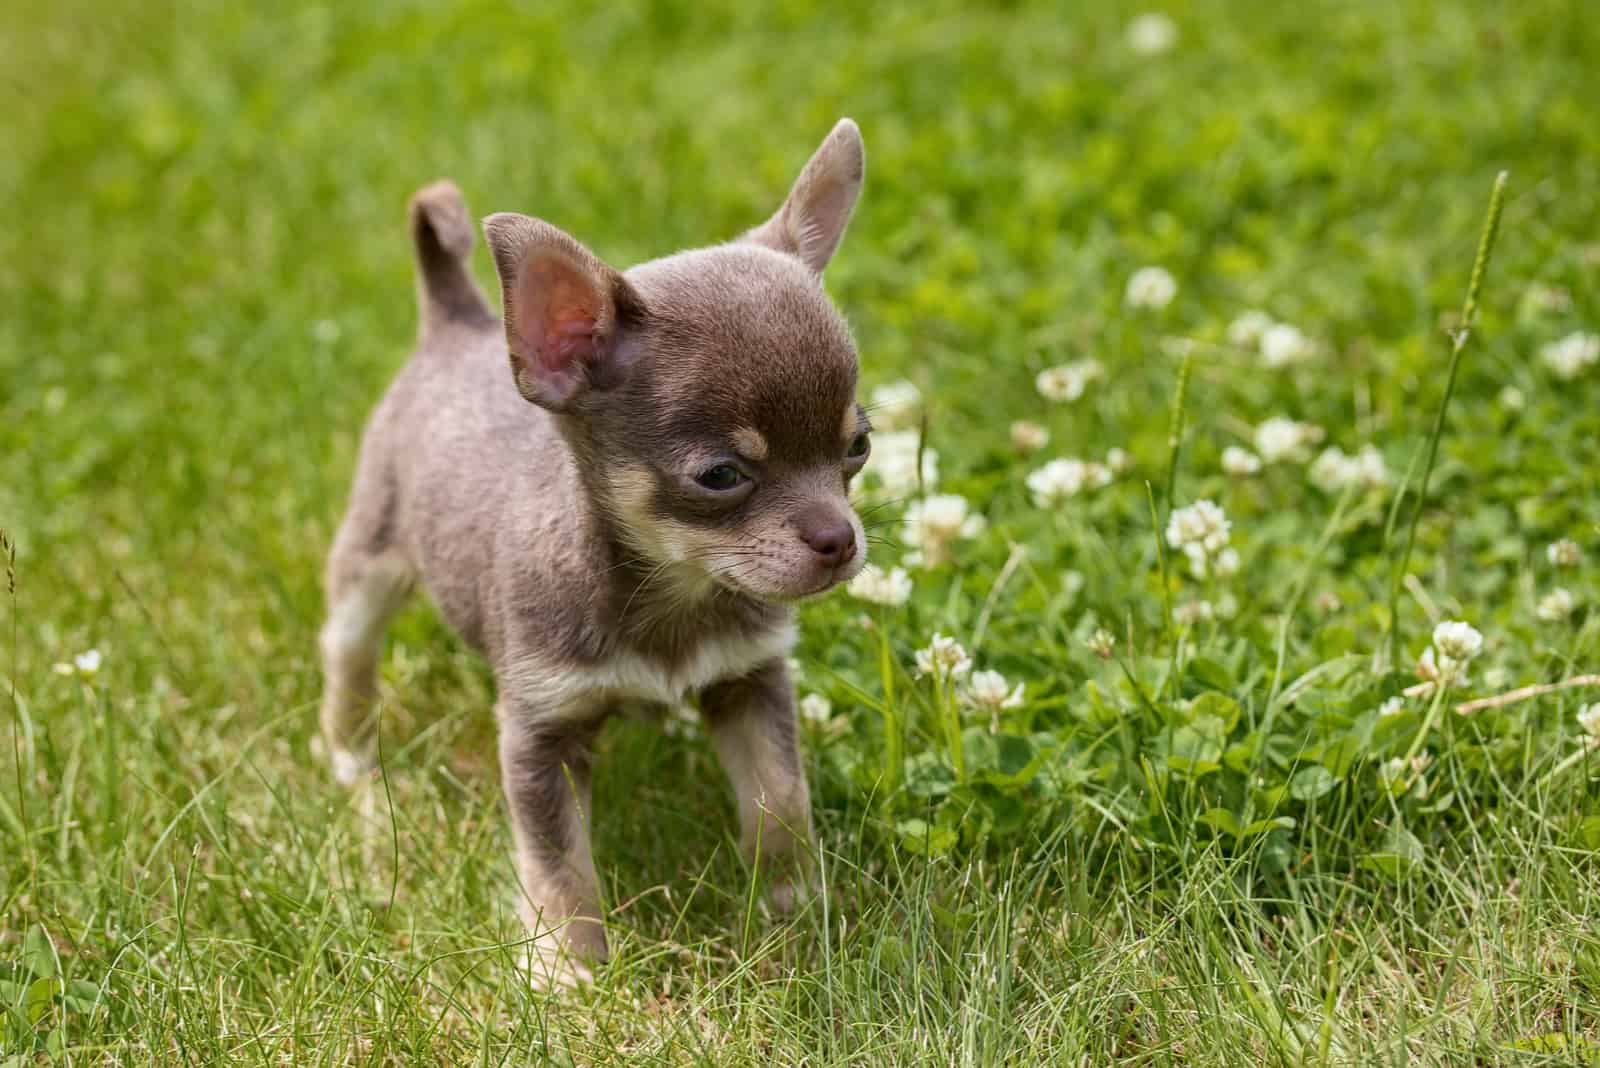 Puppy Chihuahua stands on the grass